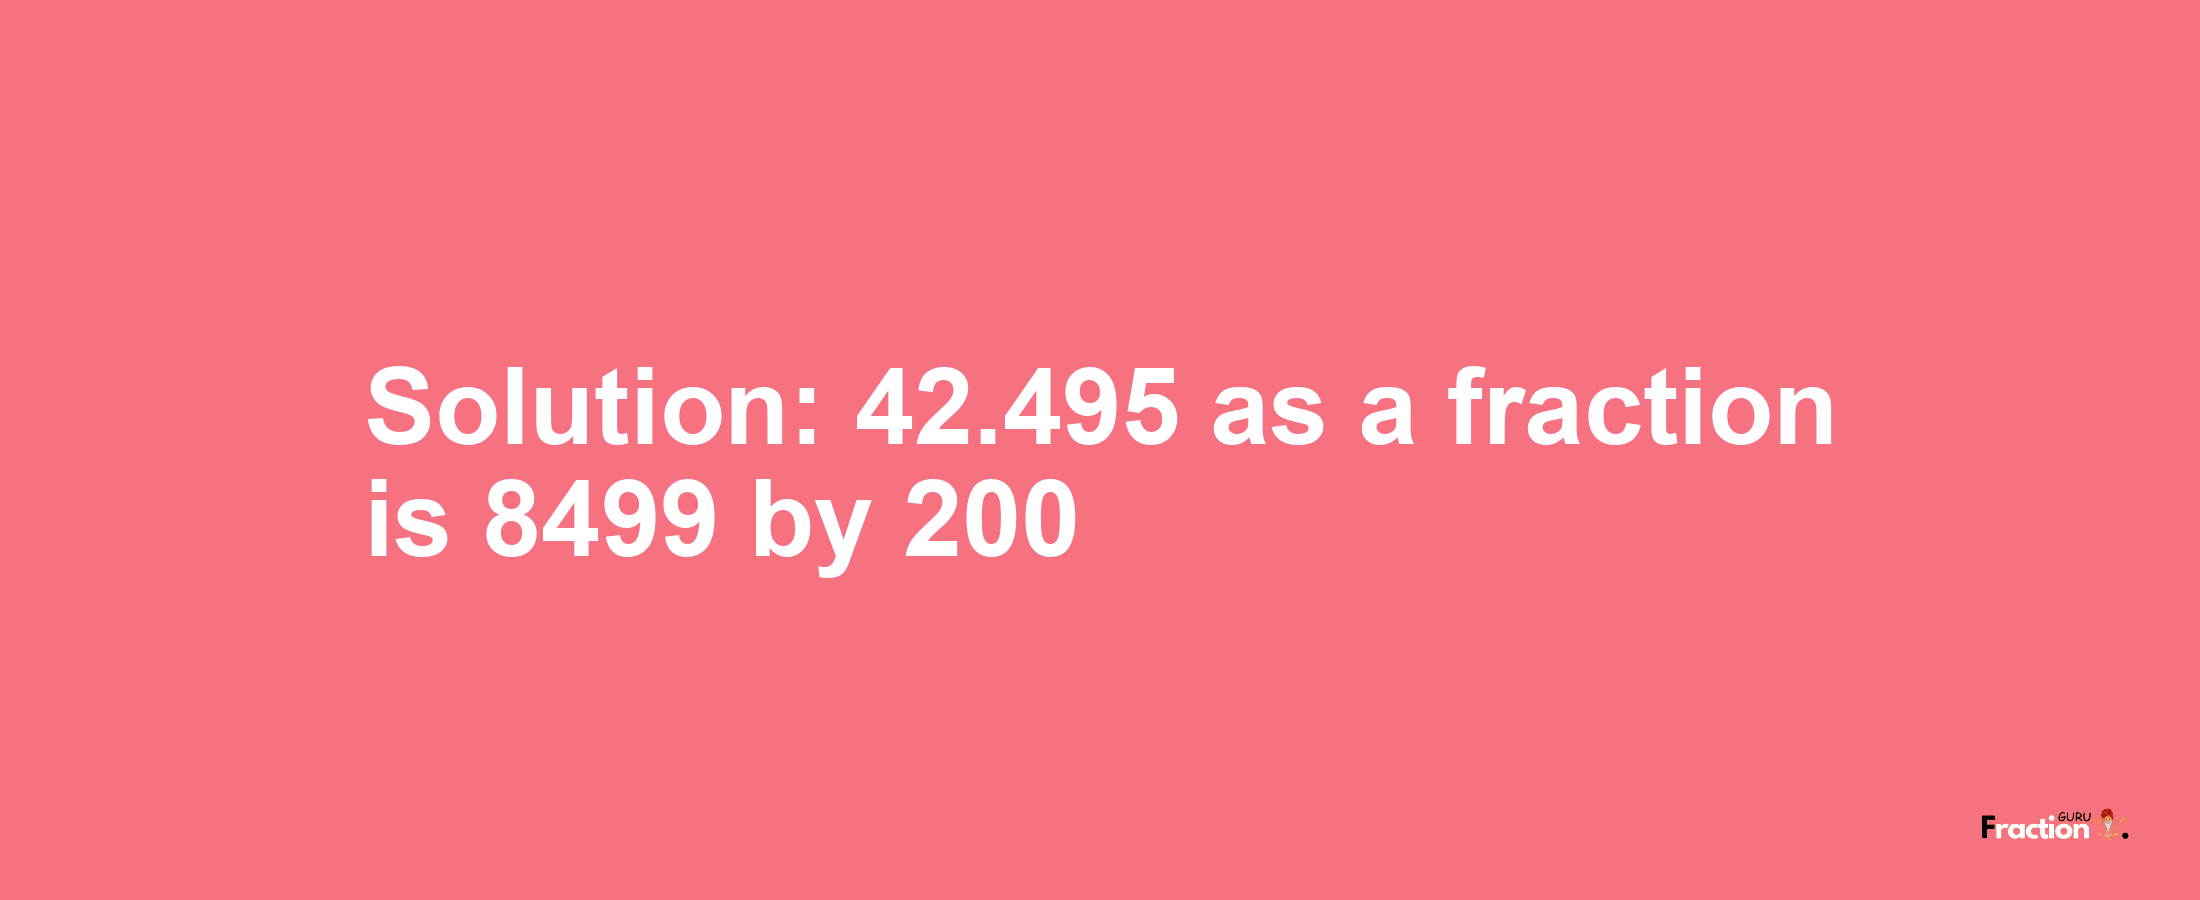 Solution:42.495 as a fraction is 8499/200